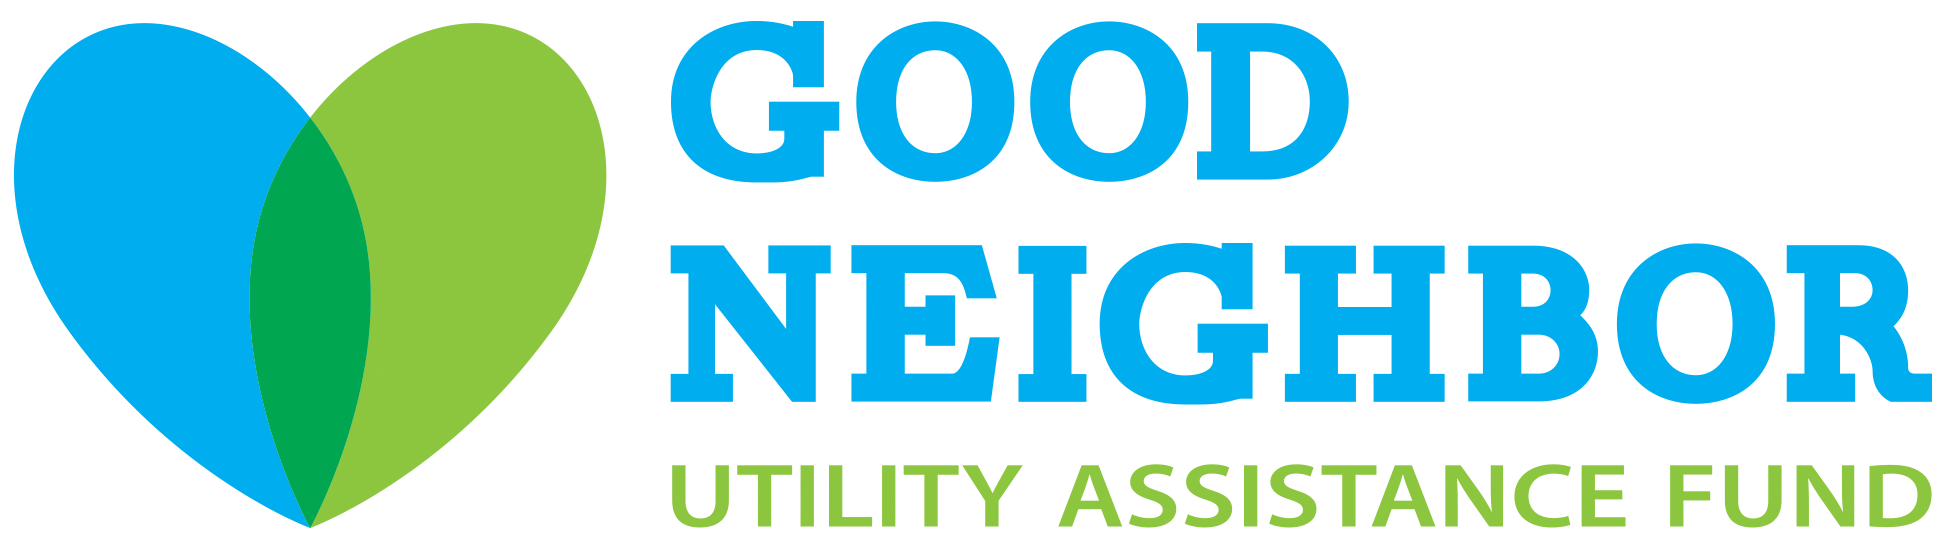 KUA donates $50,000 to Good Neighbor Fund In Response to Continued Impacts of  COVID-19 pandemic